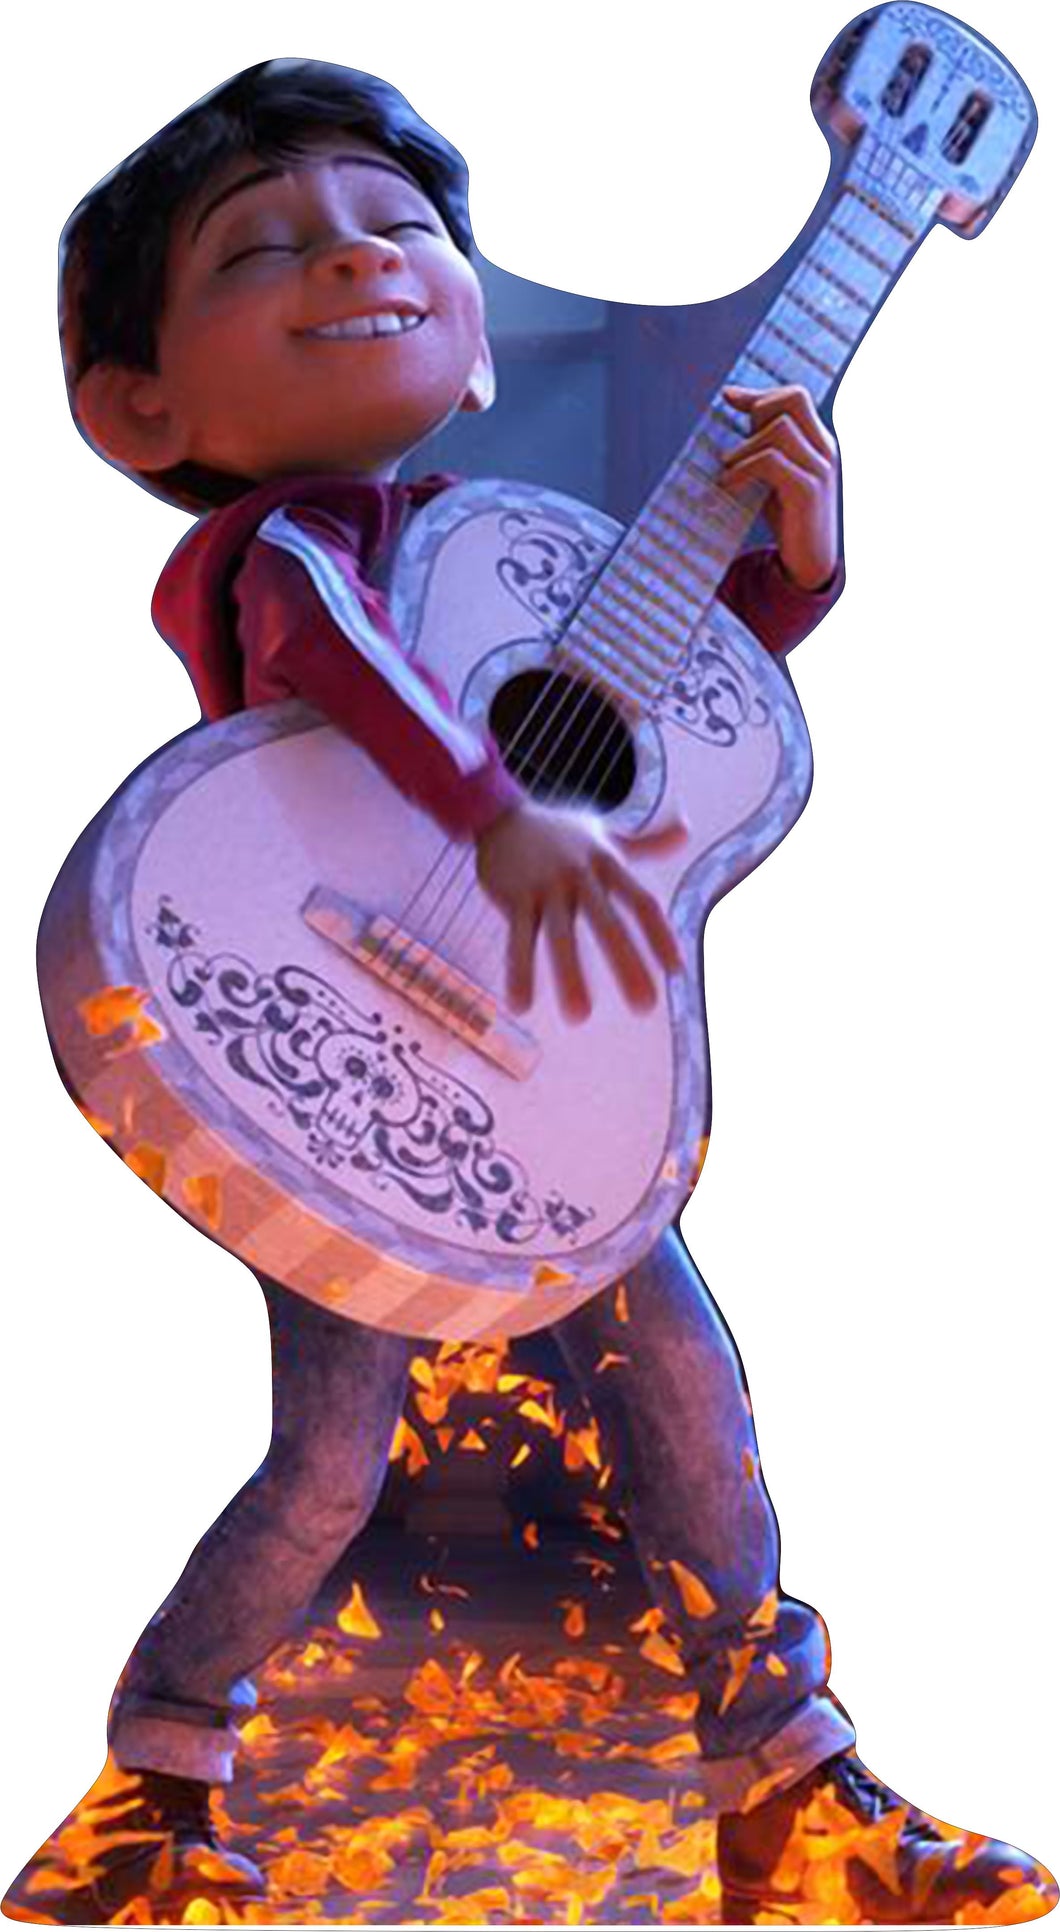 COCO- MIGUEL PLAYS GUITAR IN THE LAND OF THE DEAD - 60